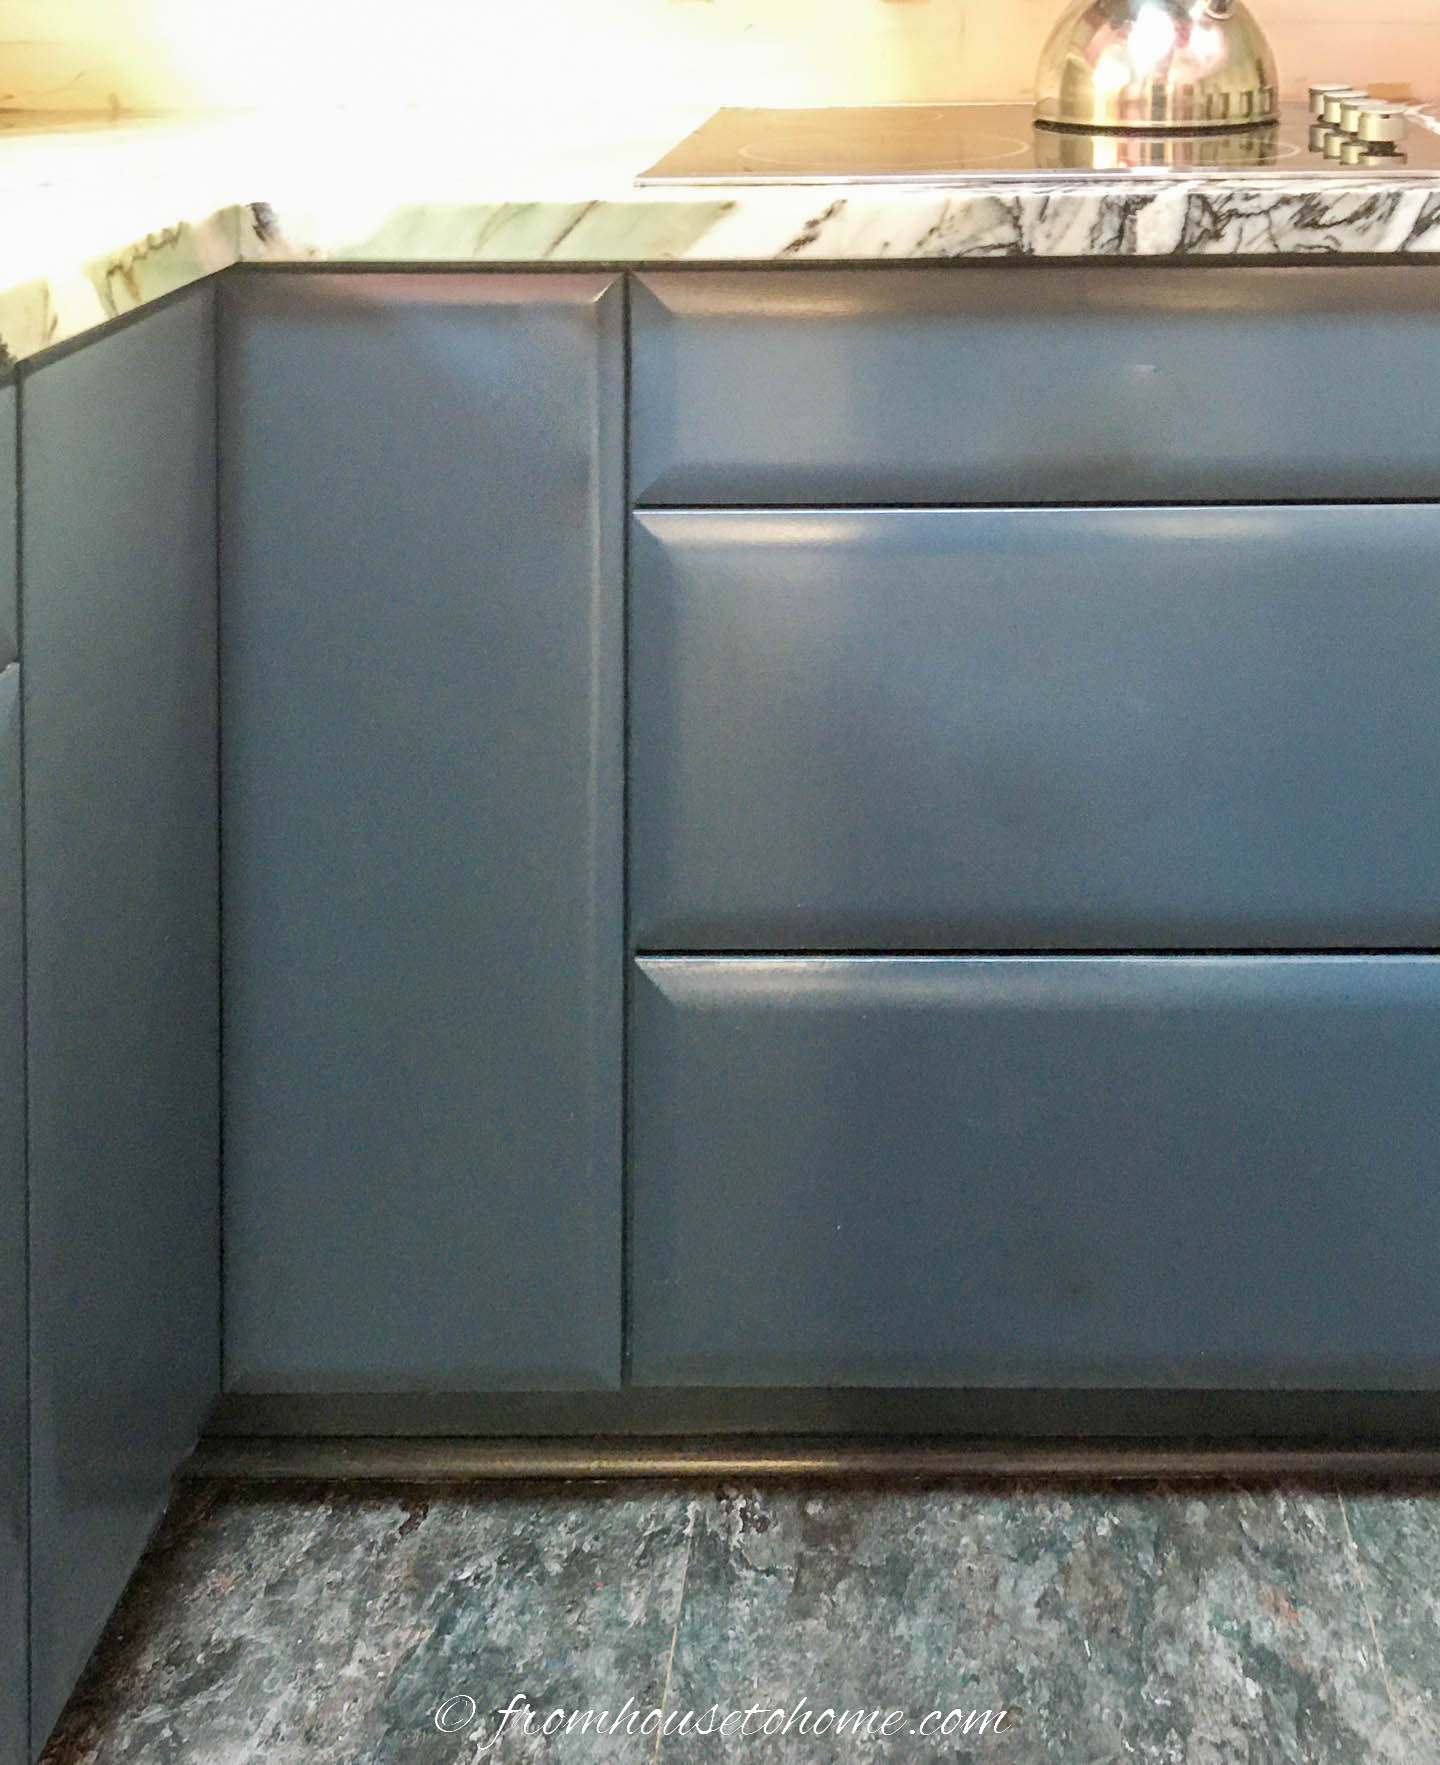 The bottom kitchen cabinets painted dark teal (Sherwin Williams 'Sea Serpent')